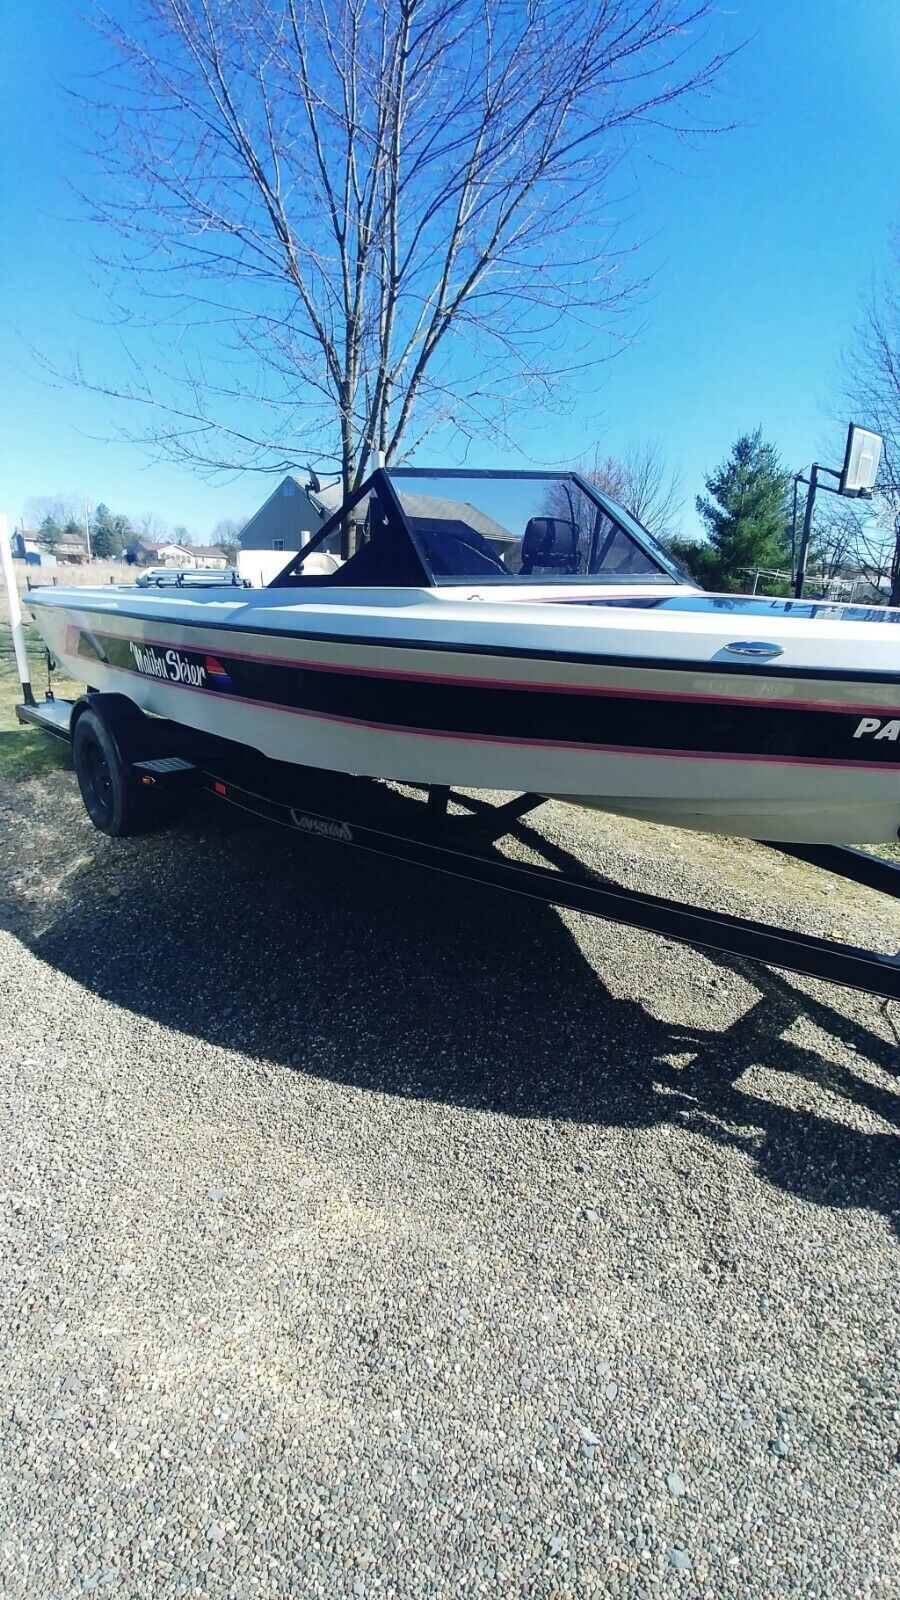 Malibu Skier 1990 for sale for $5,000 - Boats-from-USA.com